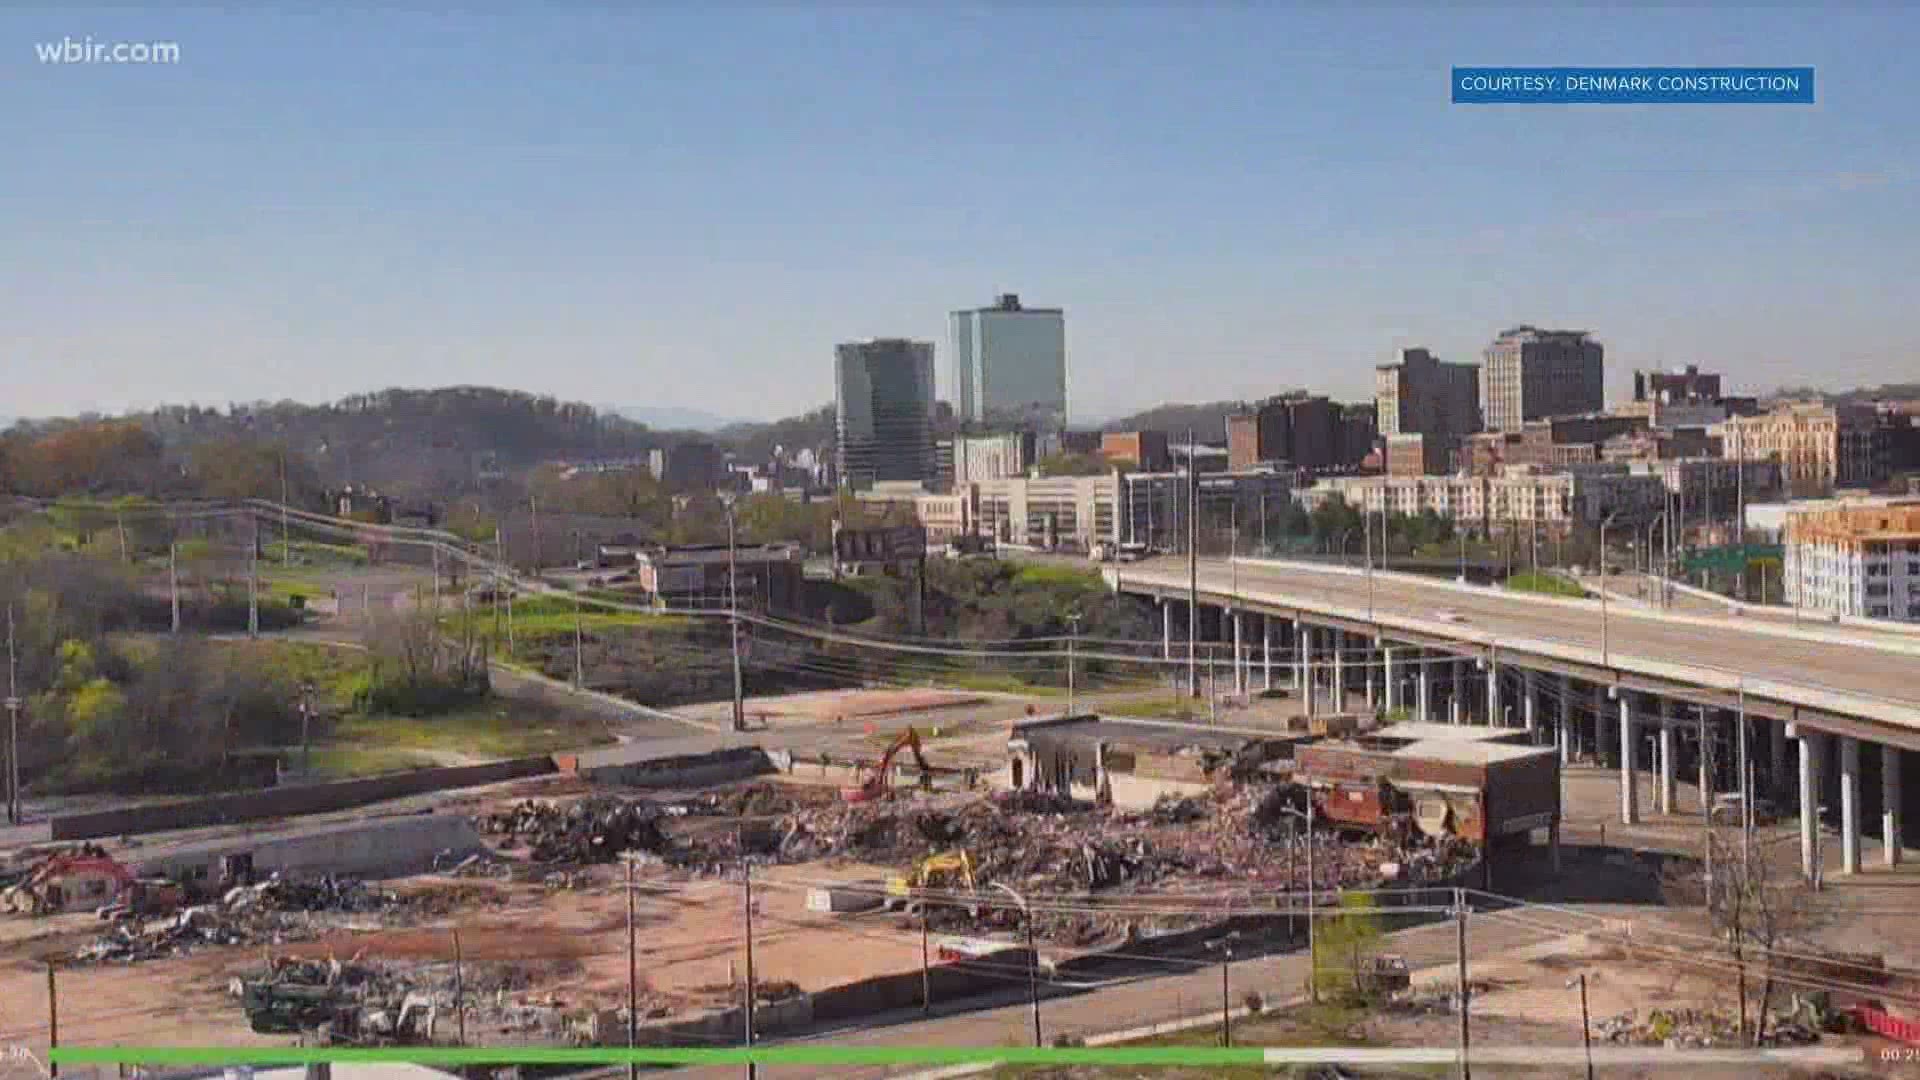 Demolition to make way for a proposed sports stadium east of the Old City is nearly complete.